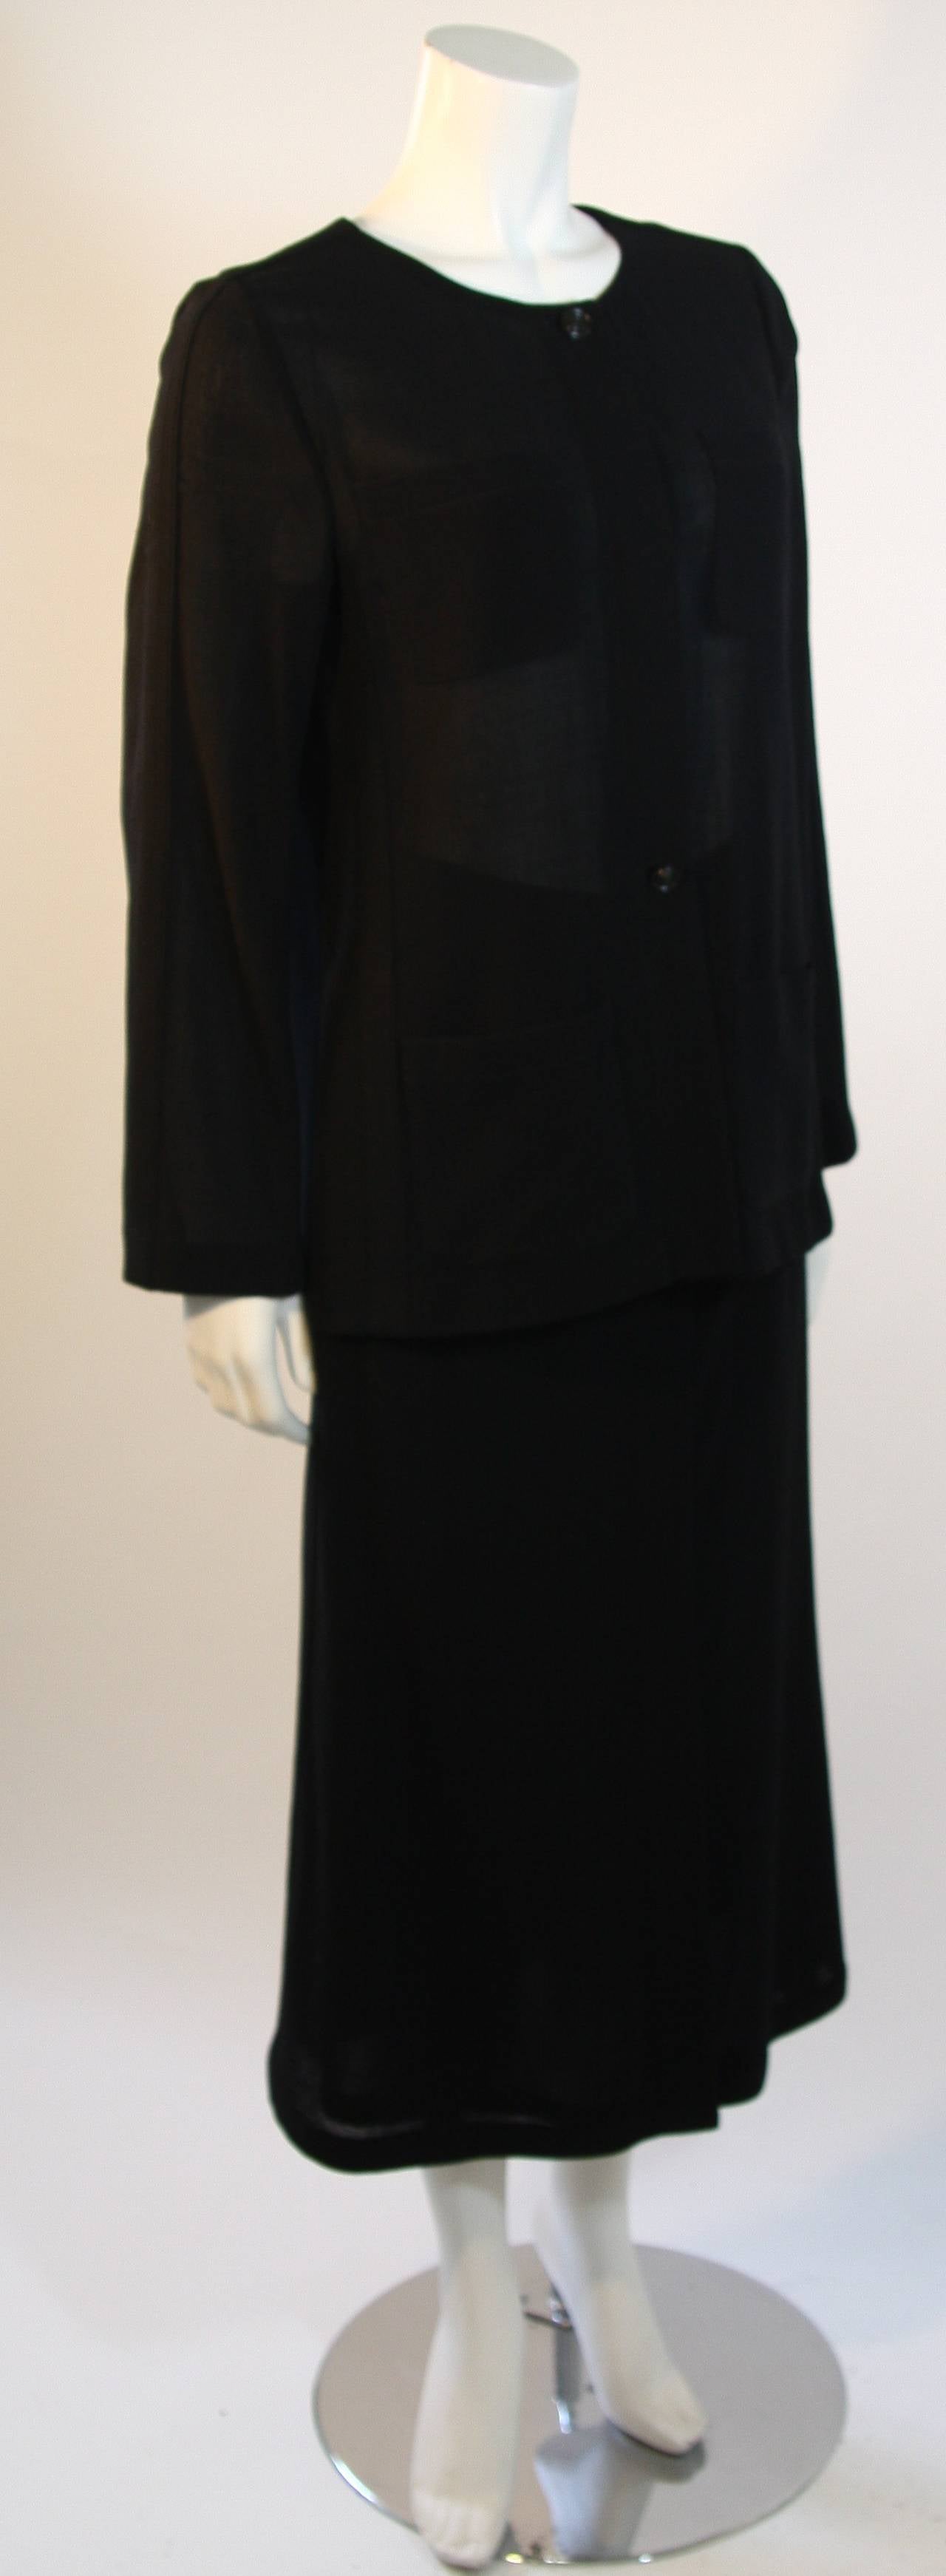 Fabulous collarless jacket or blouse made of wool crepe with visible black top button and center buttons with a hidden button placket down middle front with four pockets, long welt seam detail sleeves, and side seam detail. The original store price